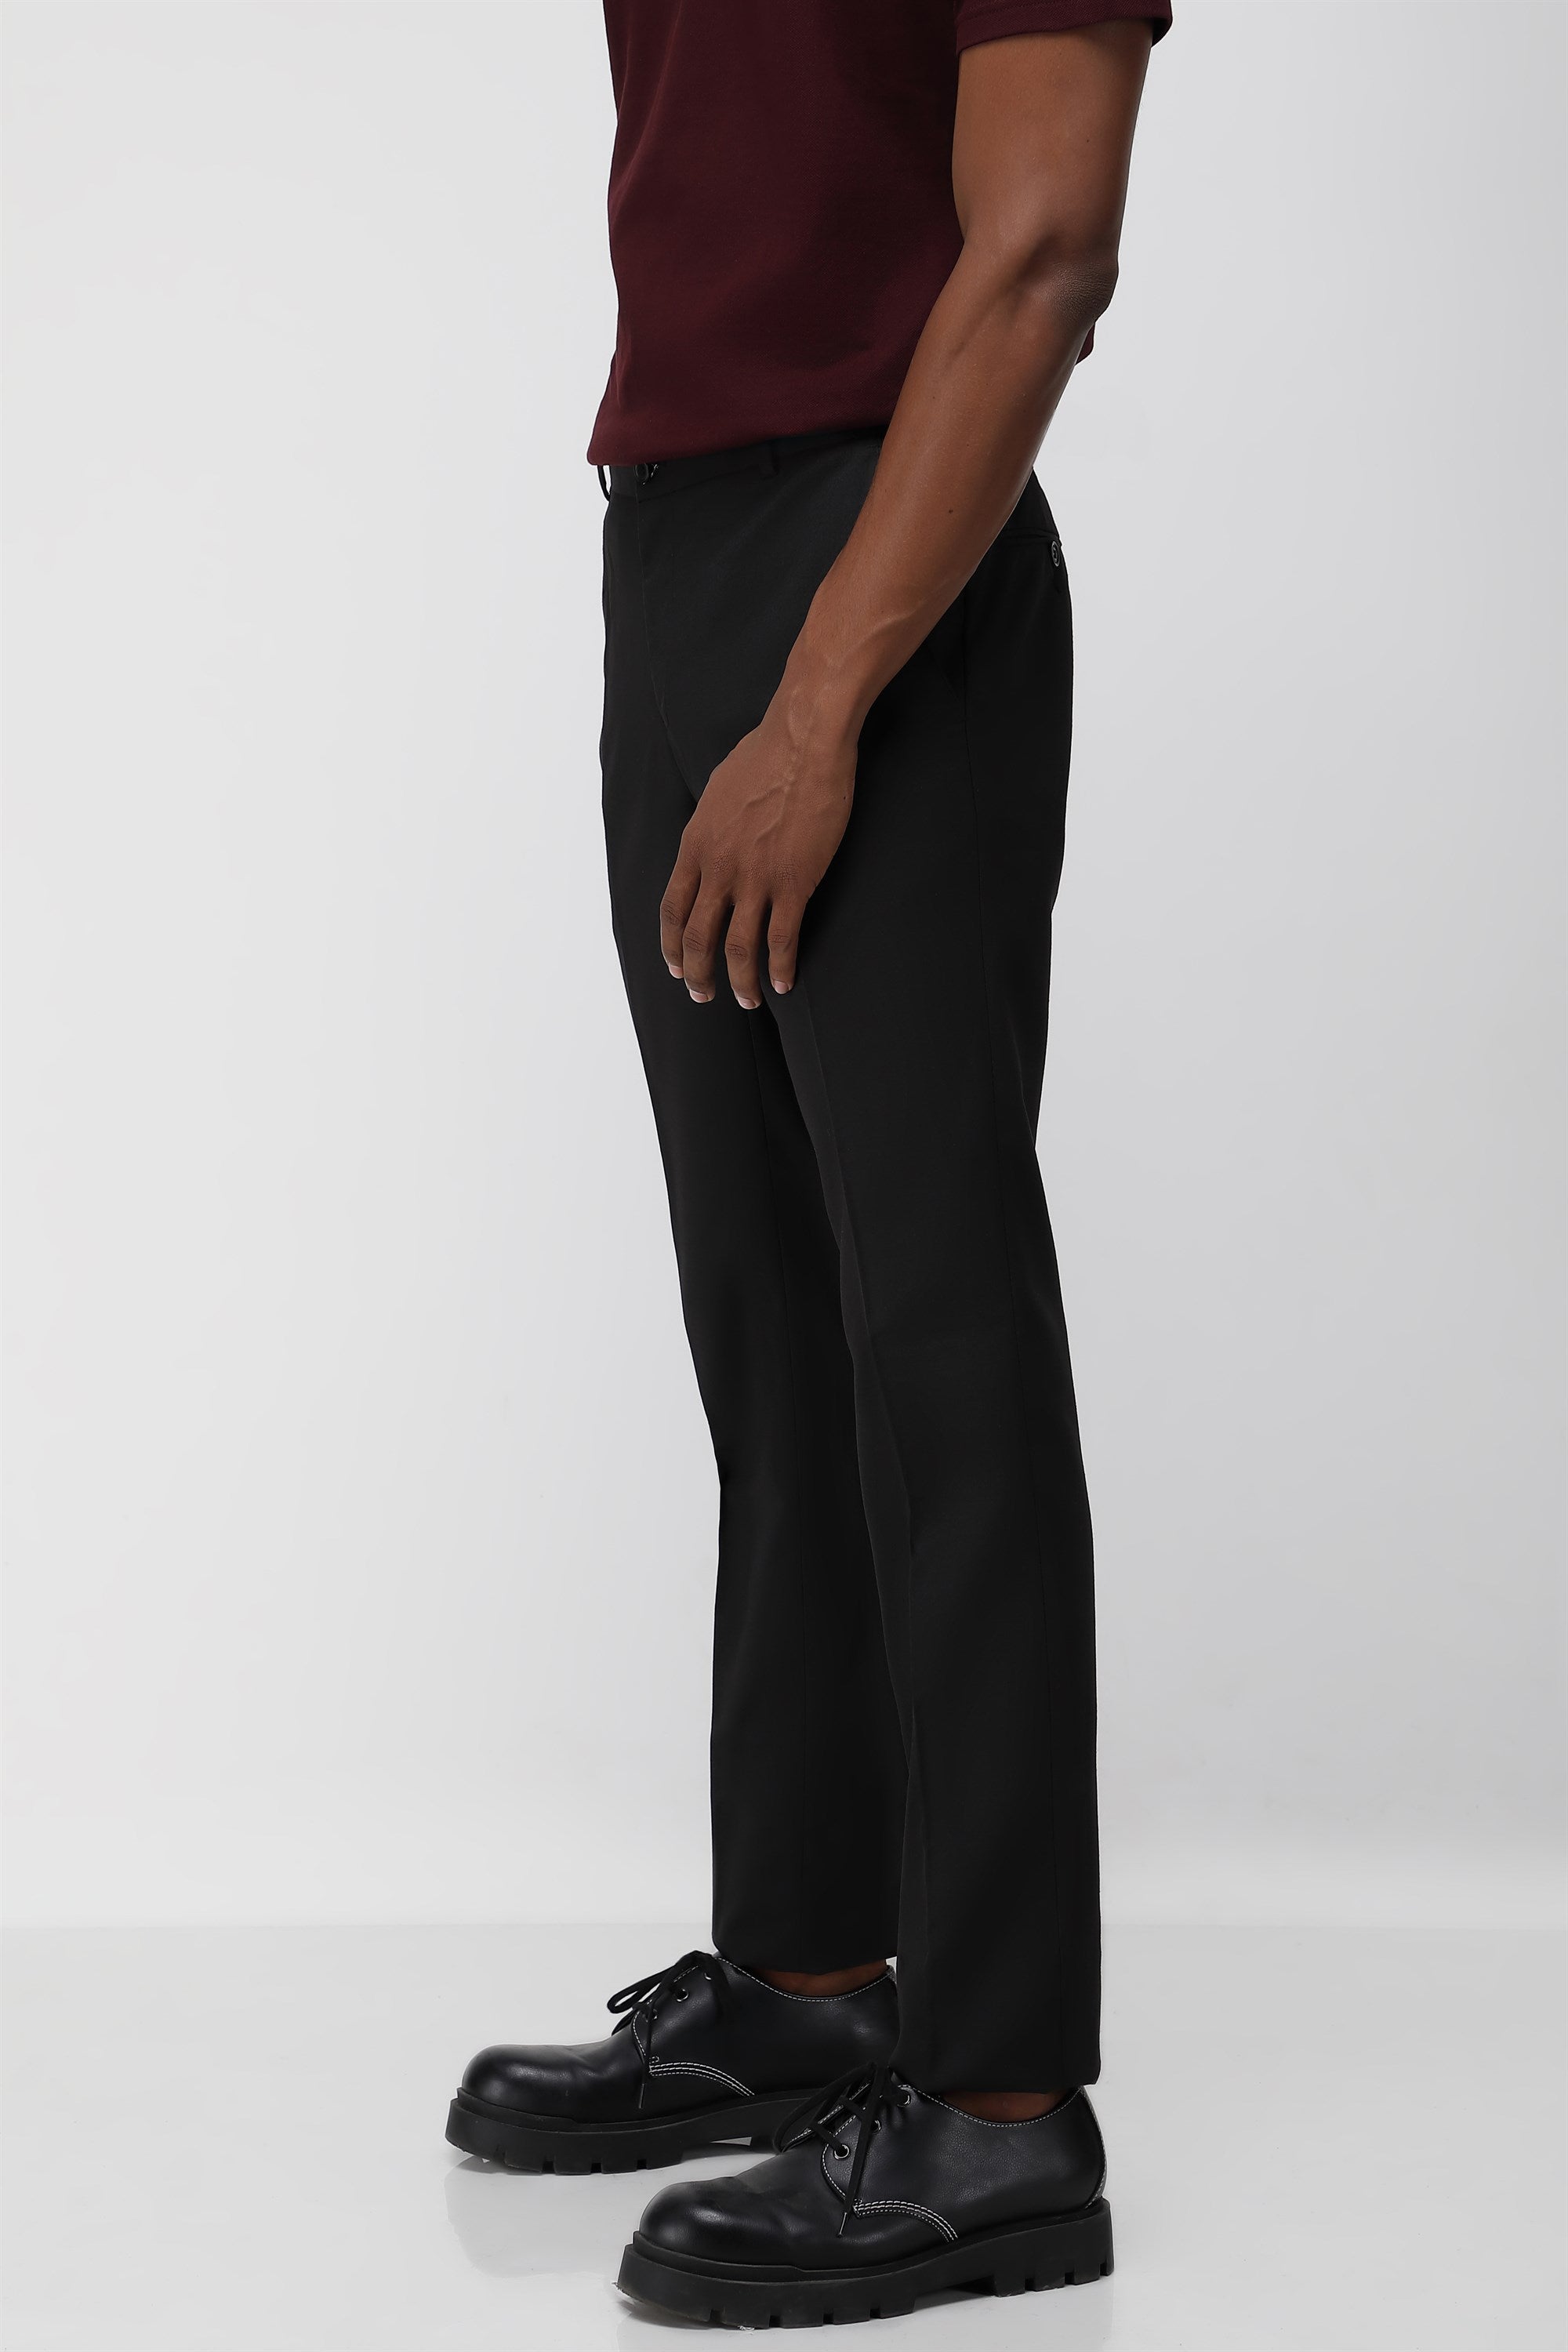 T the brand Stretch Formal Flat Front Trouser - Black